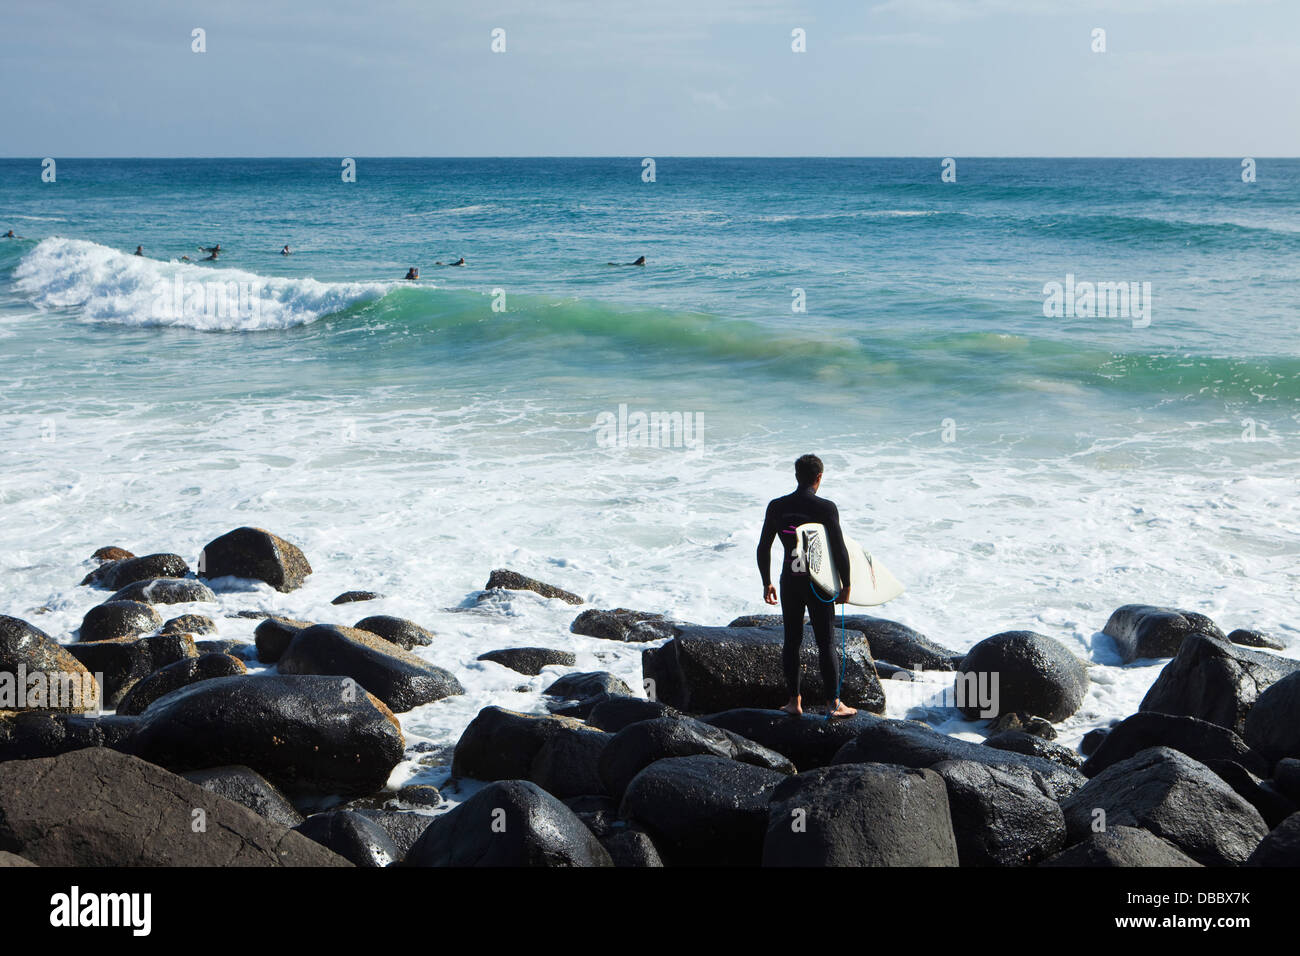 Surfer looking out to sea. Burleigh Heads, Gold Coast, Queensland, Australia Stock Photo